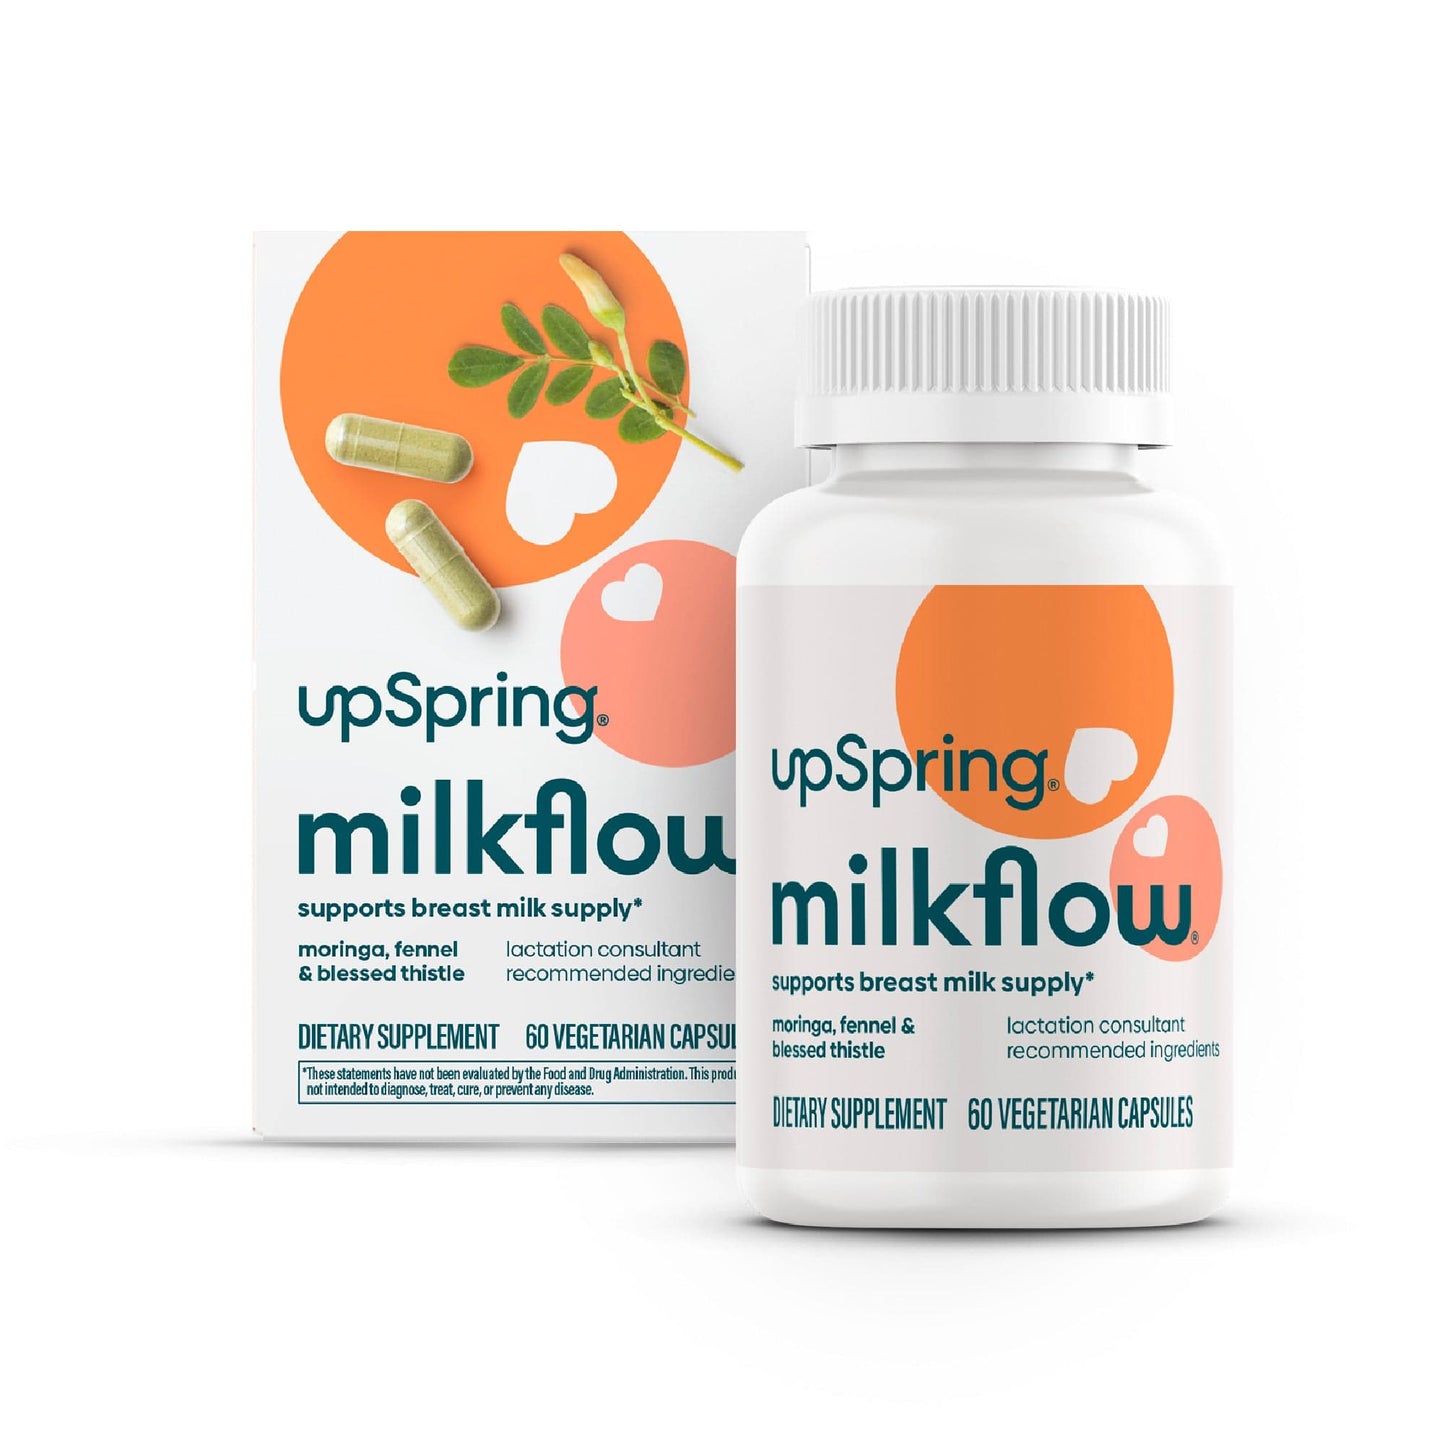 The box and bottle of MilkFlow Fenugreek Free Capsules from UpSpring